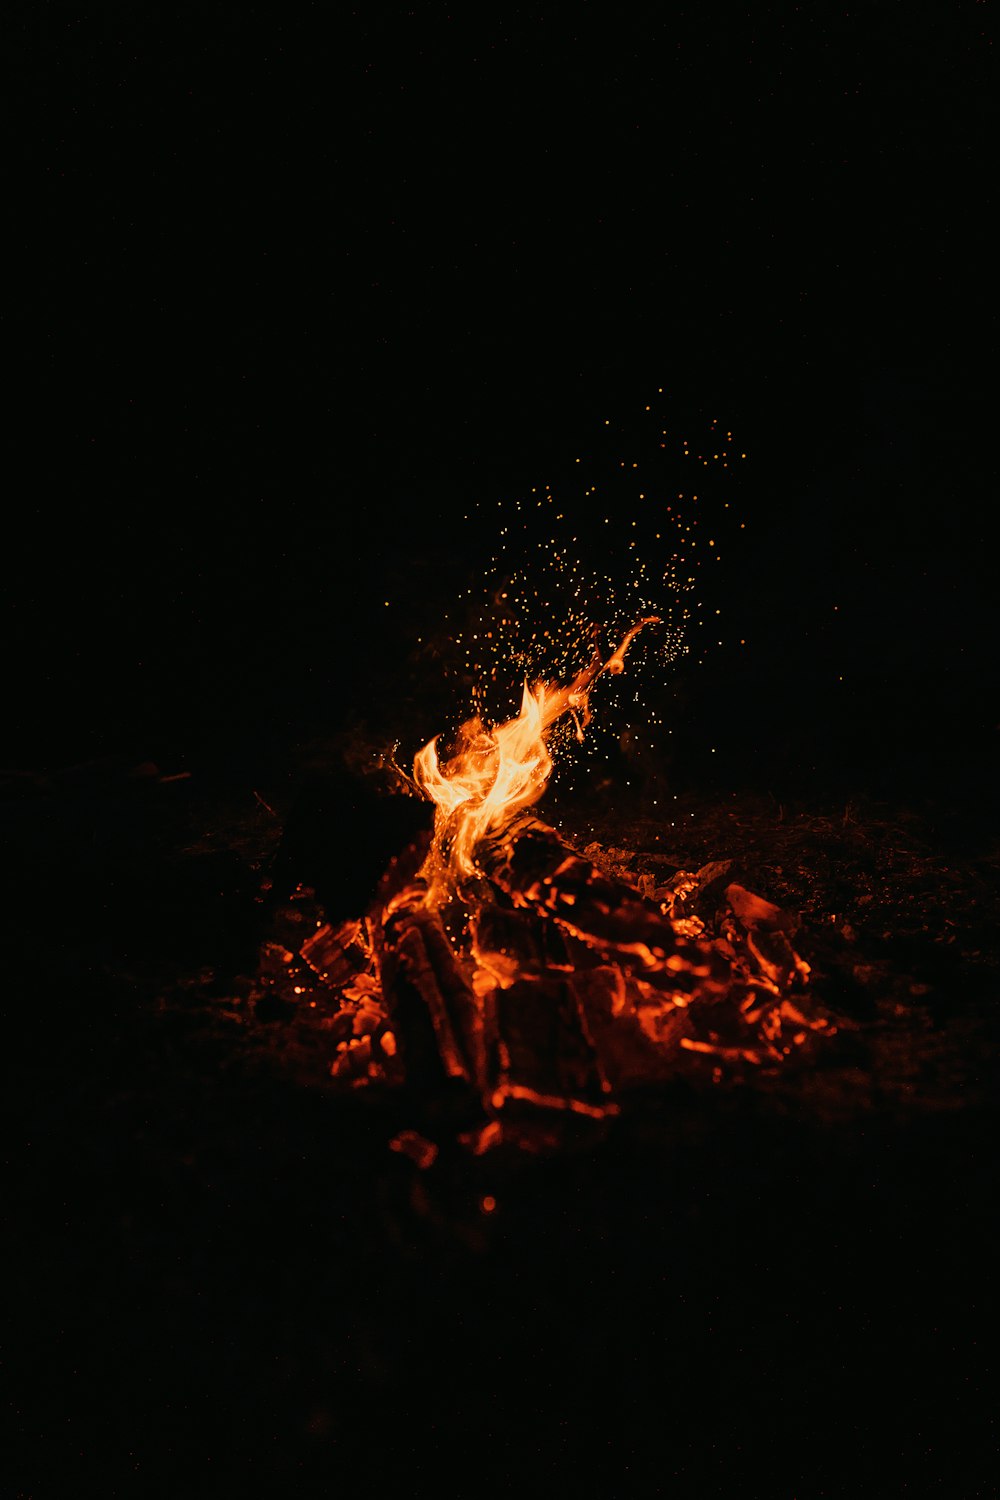 Embers Pictures Download Free Images Stock Photos On Unsplash